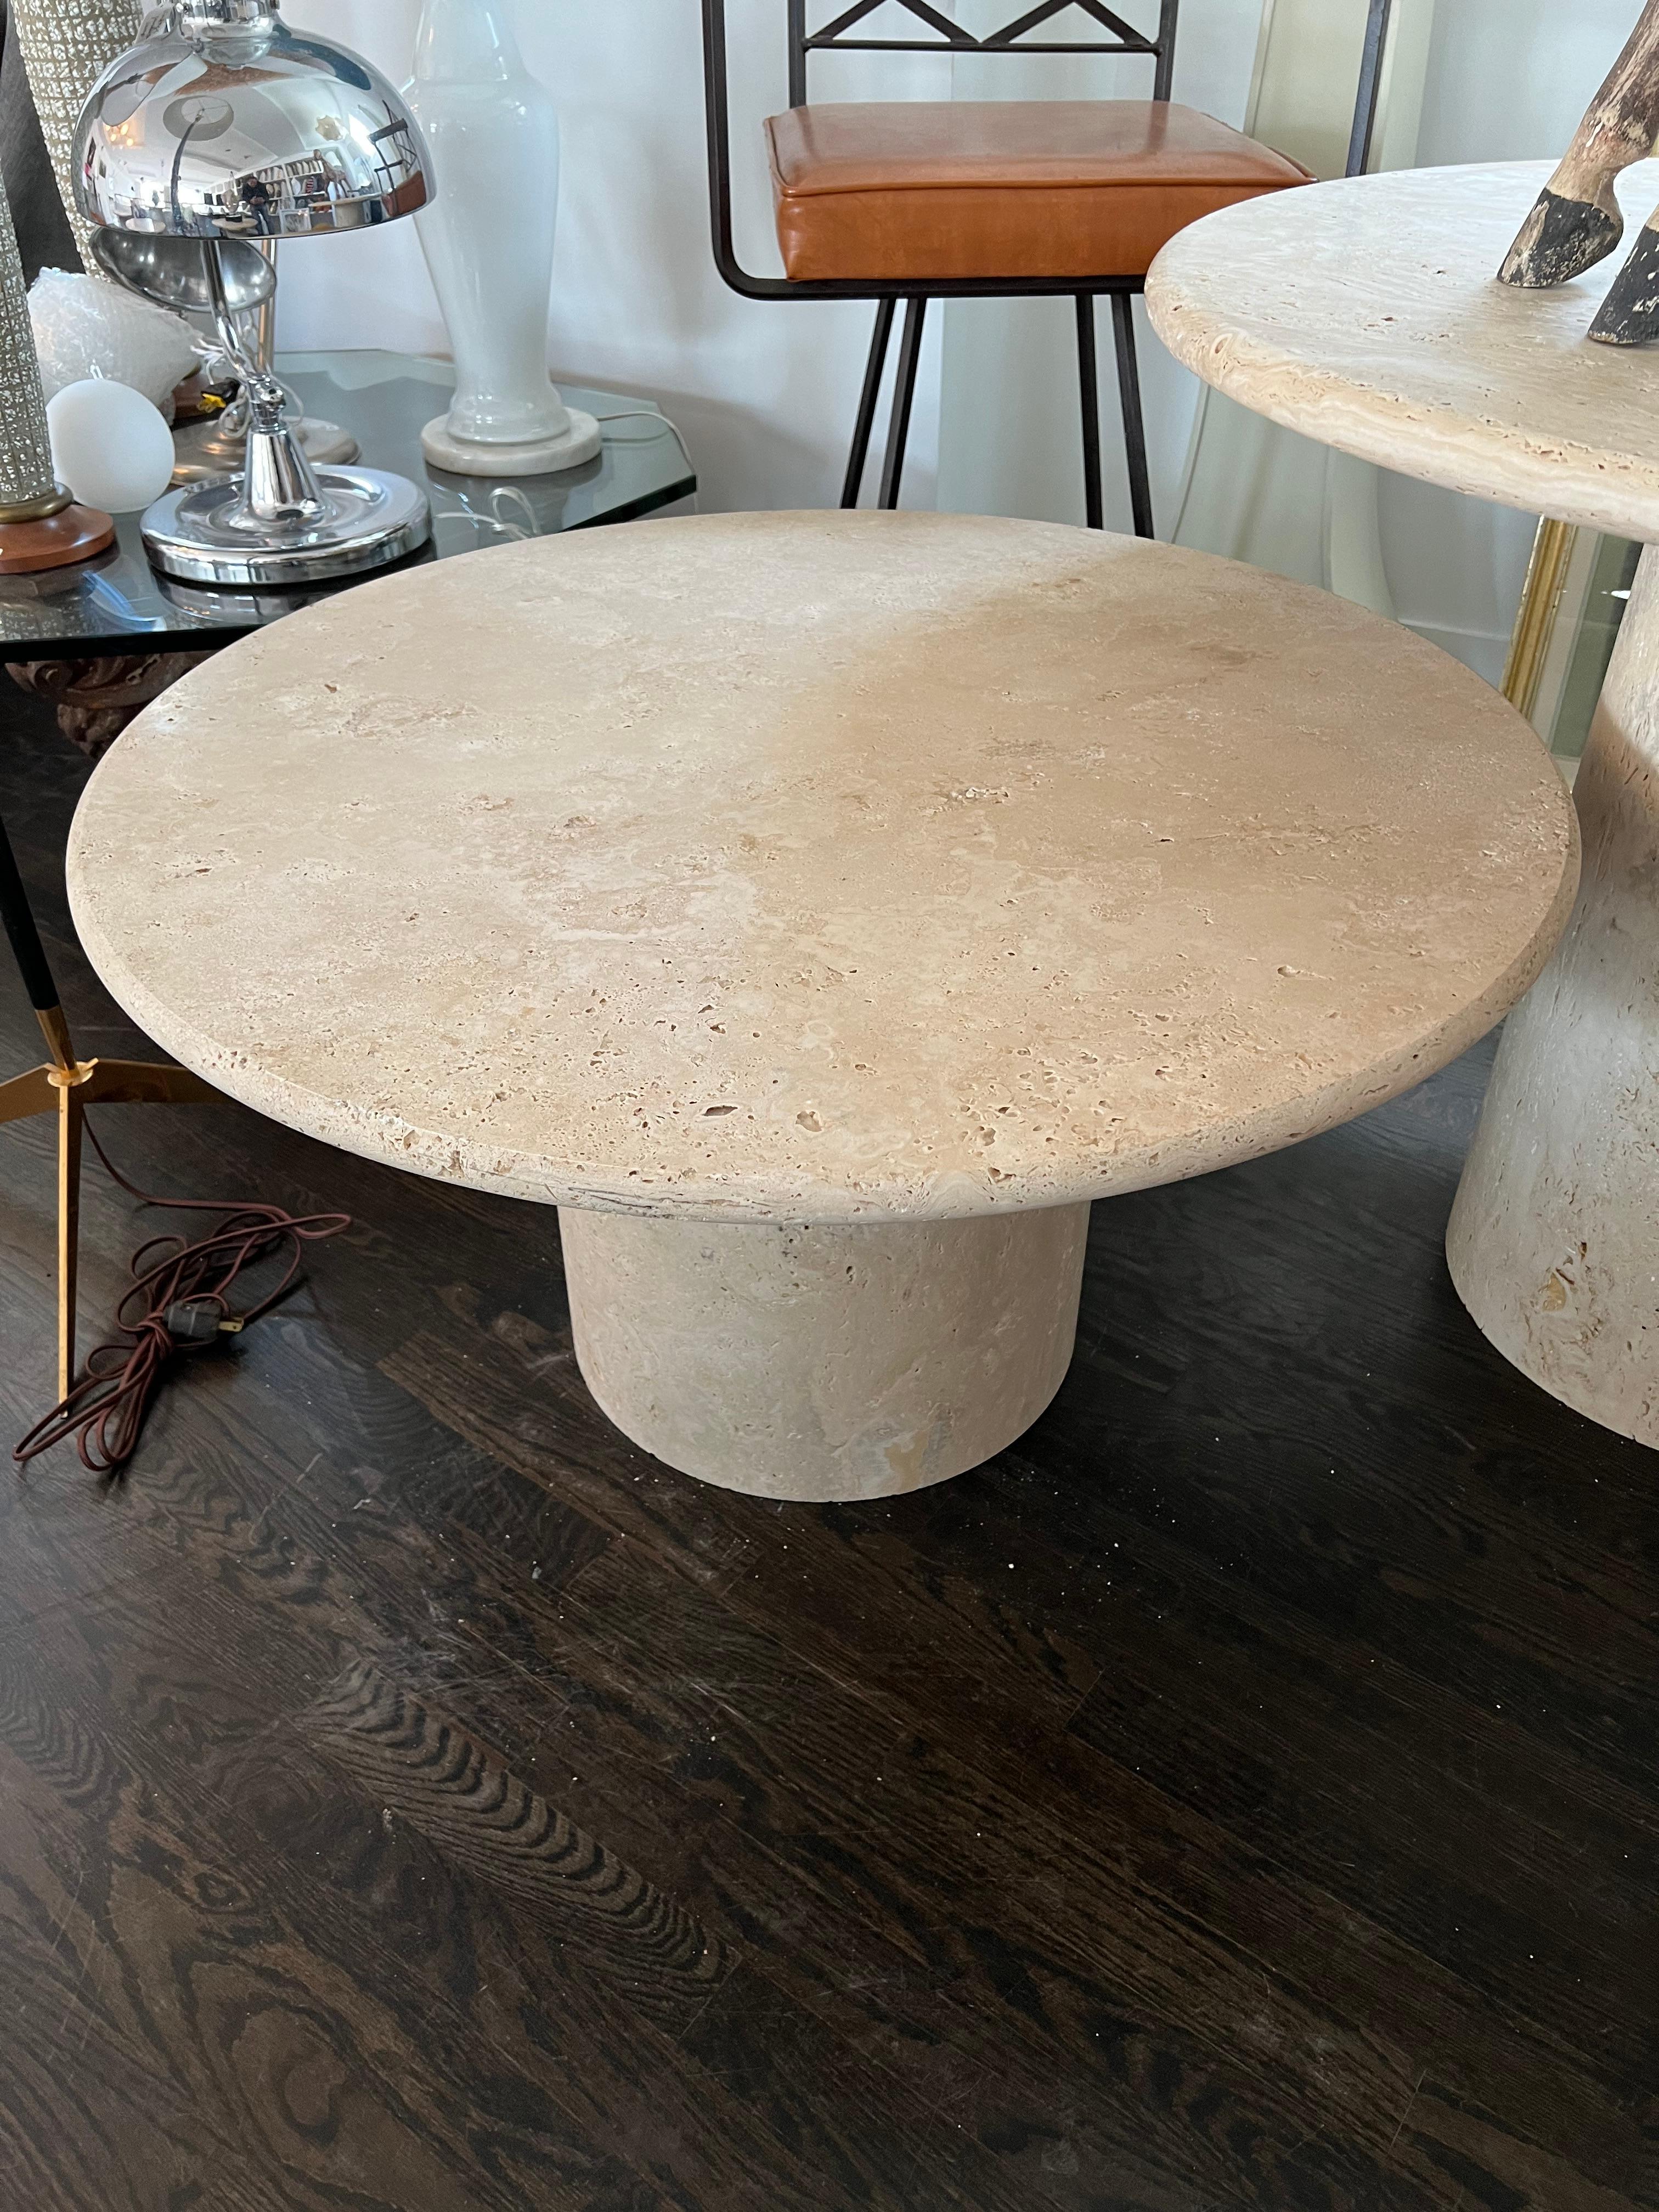 Round Roman travertine coffee table by Le Lampade.
Available now. This table can be totally custom. Measures: 35